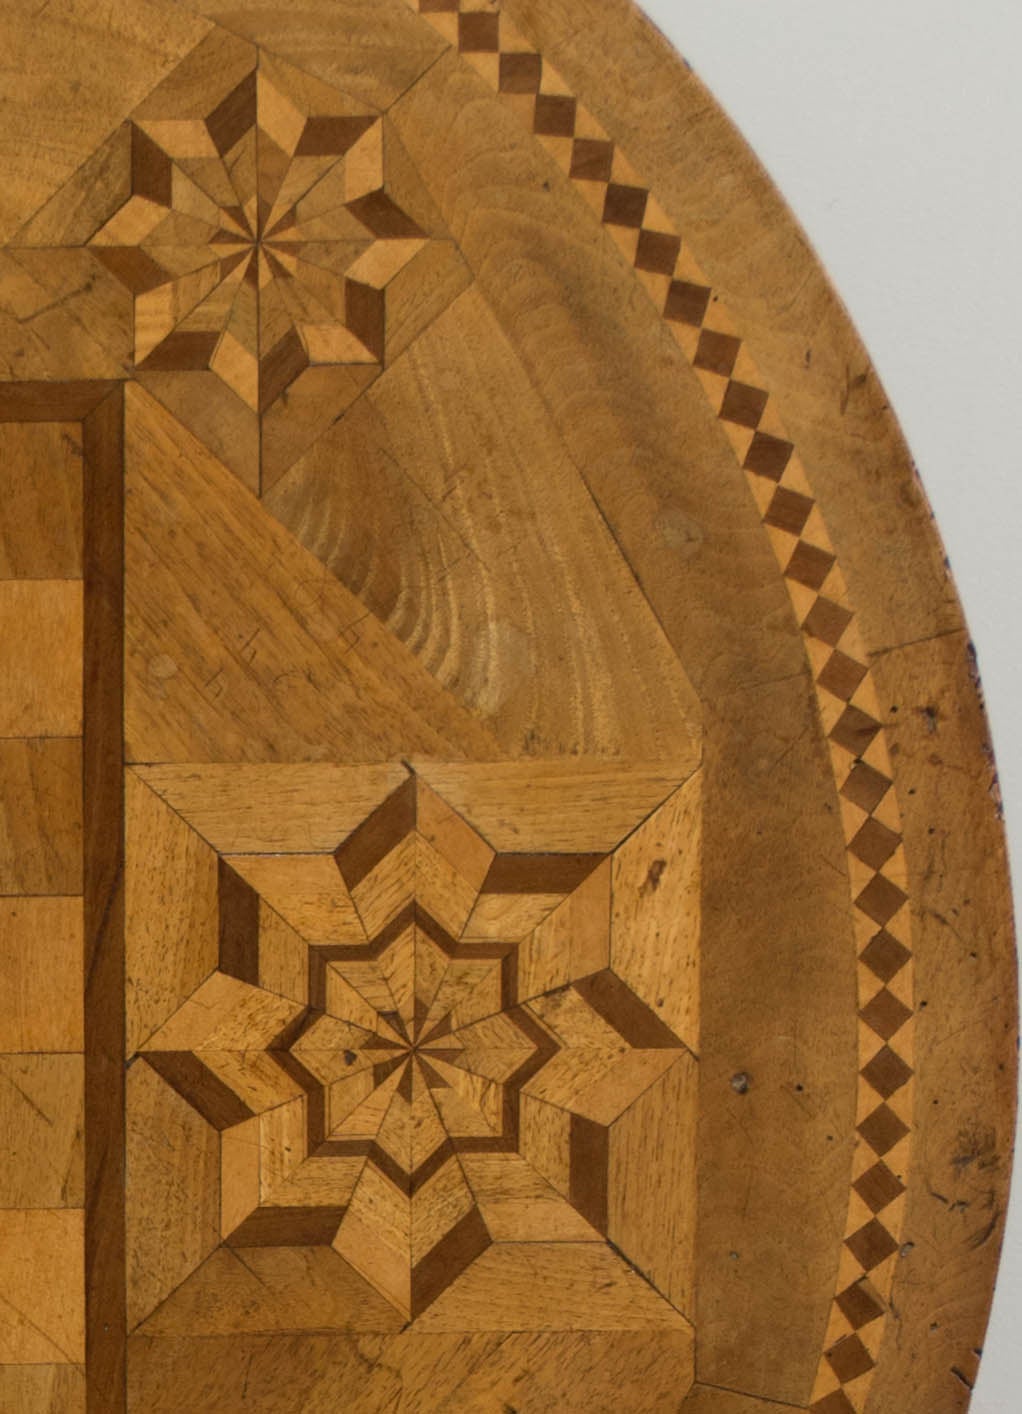 19th century tilt-top game table made of walnut, with various wood veneers used for the marquetry checkerboard and star patterns. The turned base is solid walnut with three hand-carved feet held in place by wooden screws (see detail photo). This is